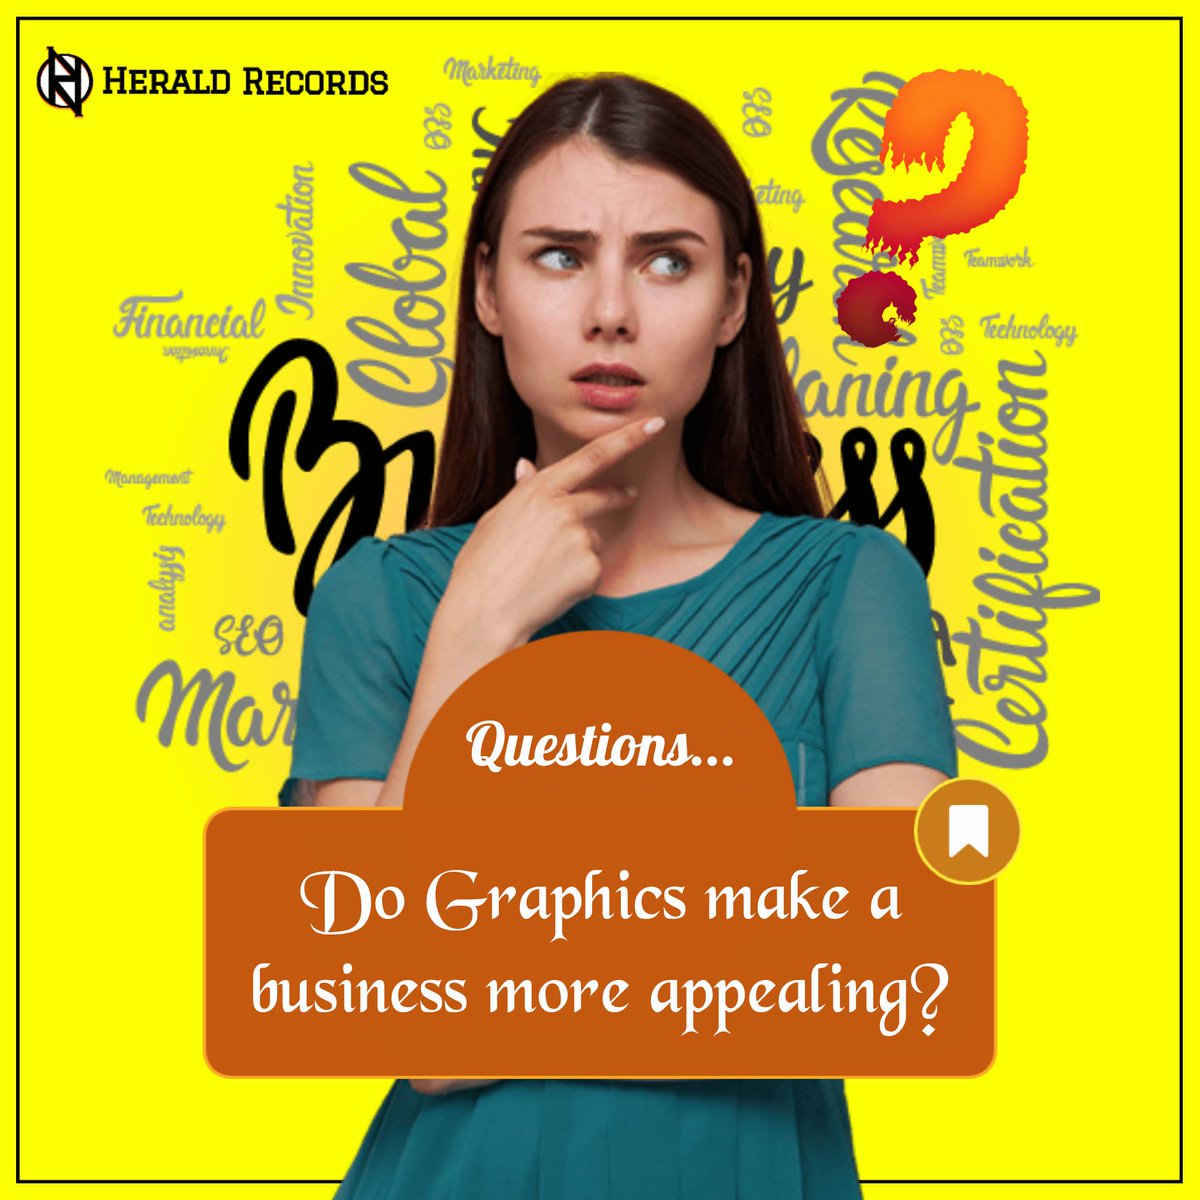 This has been a recurring question on my mind🤔, how important do you think Designs are for a business?#graphicdesigner #creativedesigner #webdesign #logodesign #brandingstrategy #illustration #typedesign #packagingdesign #vectordesign #visualidentity #printmaterials